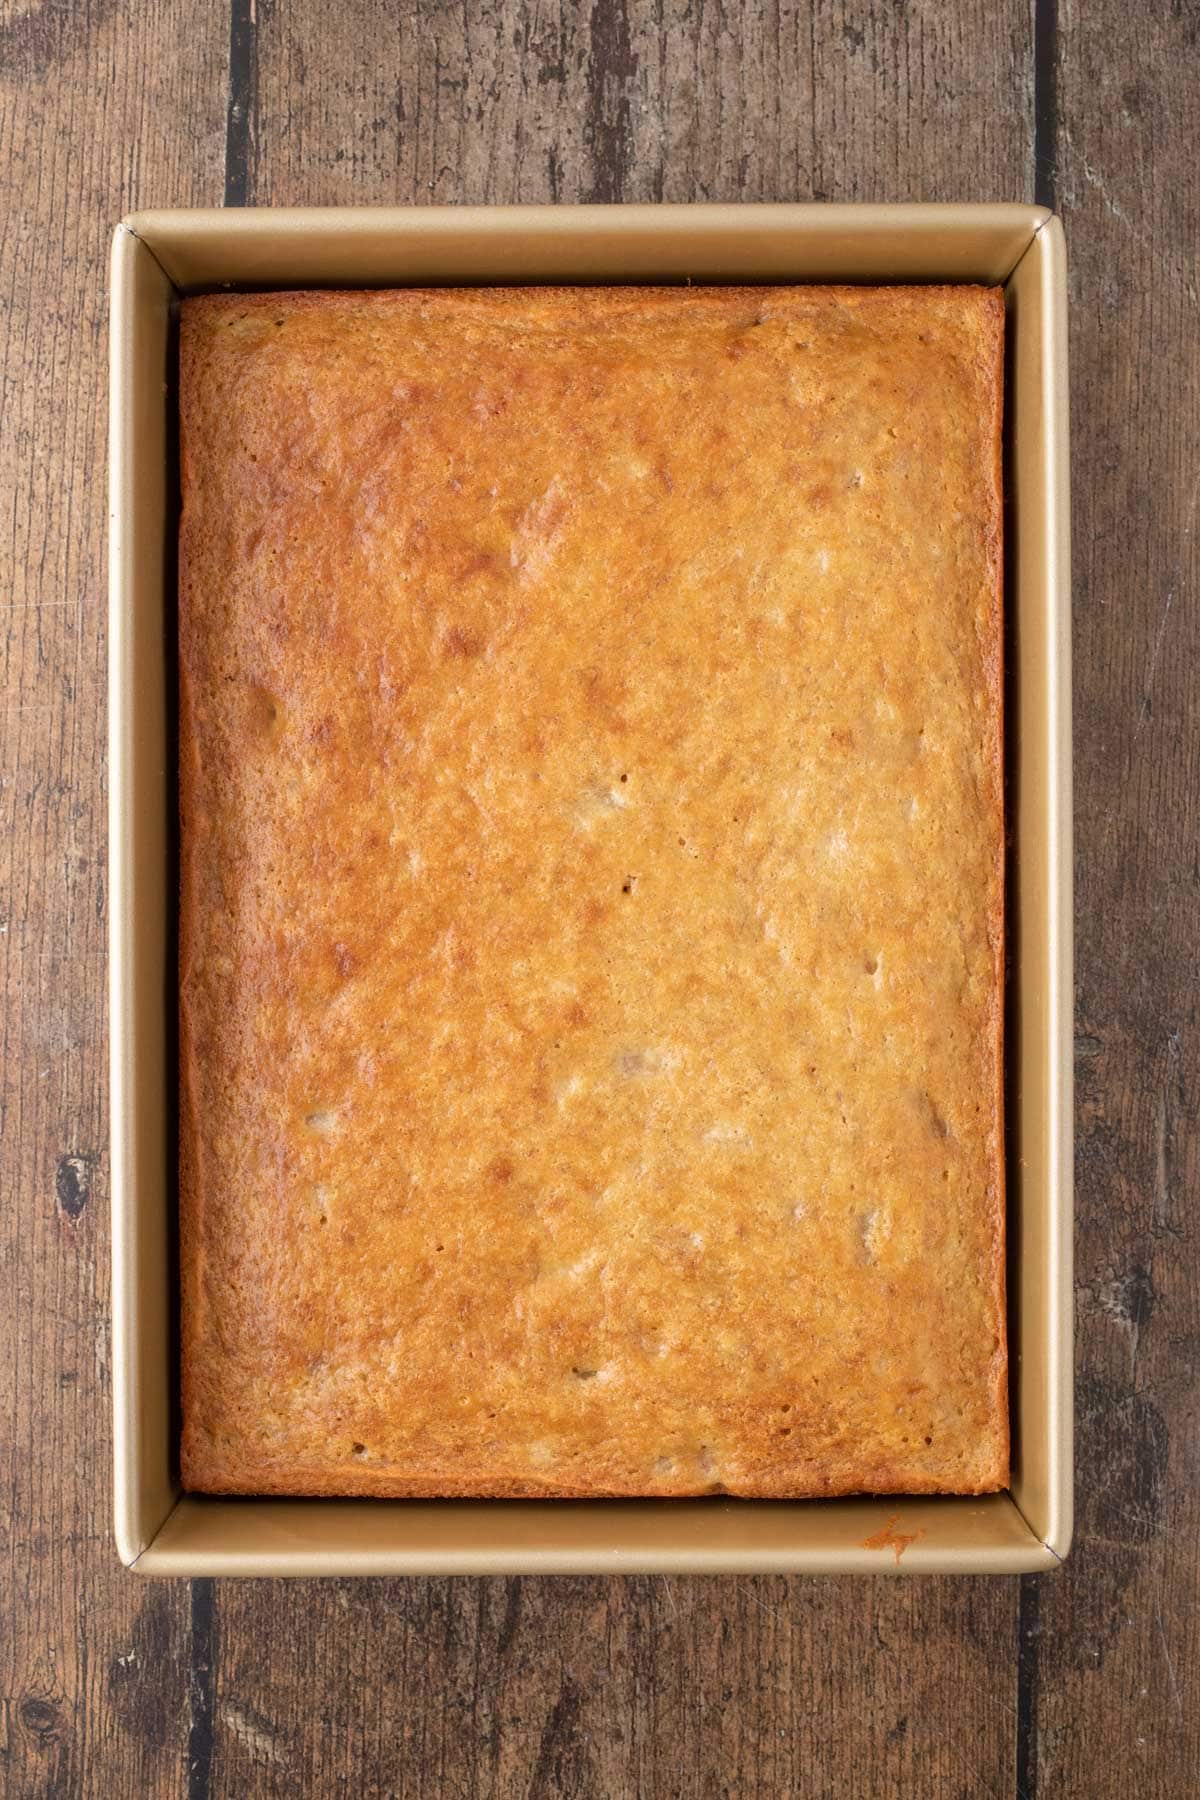 Banana Bread baked in the pan